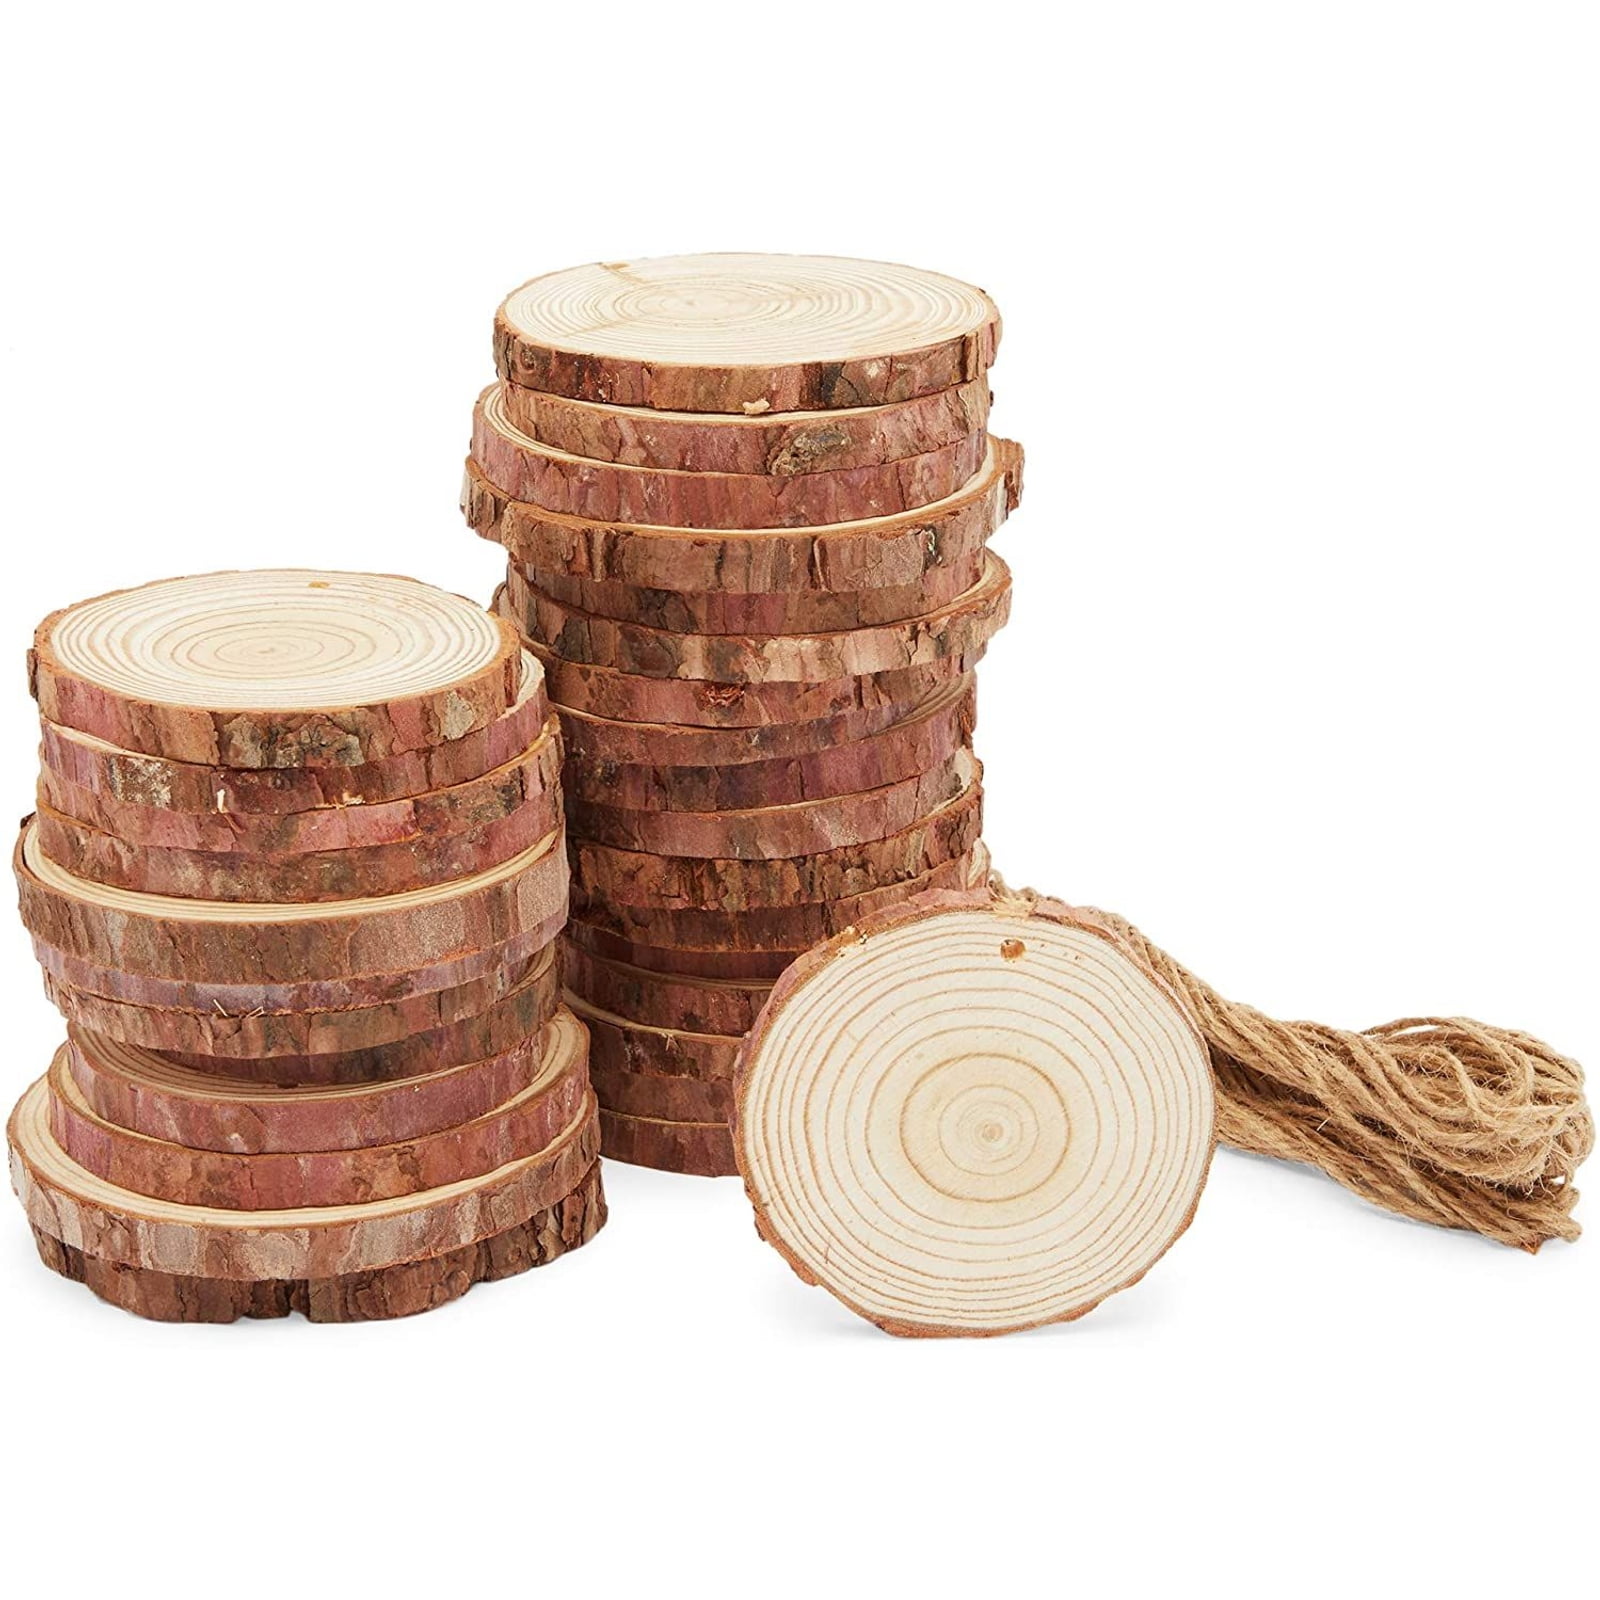 CEWOR 24pcs 3.1-3.5 Natural Wood Slices with Holes Craft Wood and 33Ft Jute Twine 